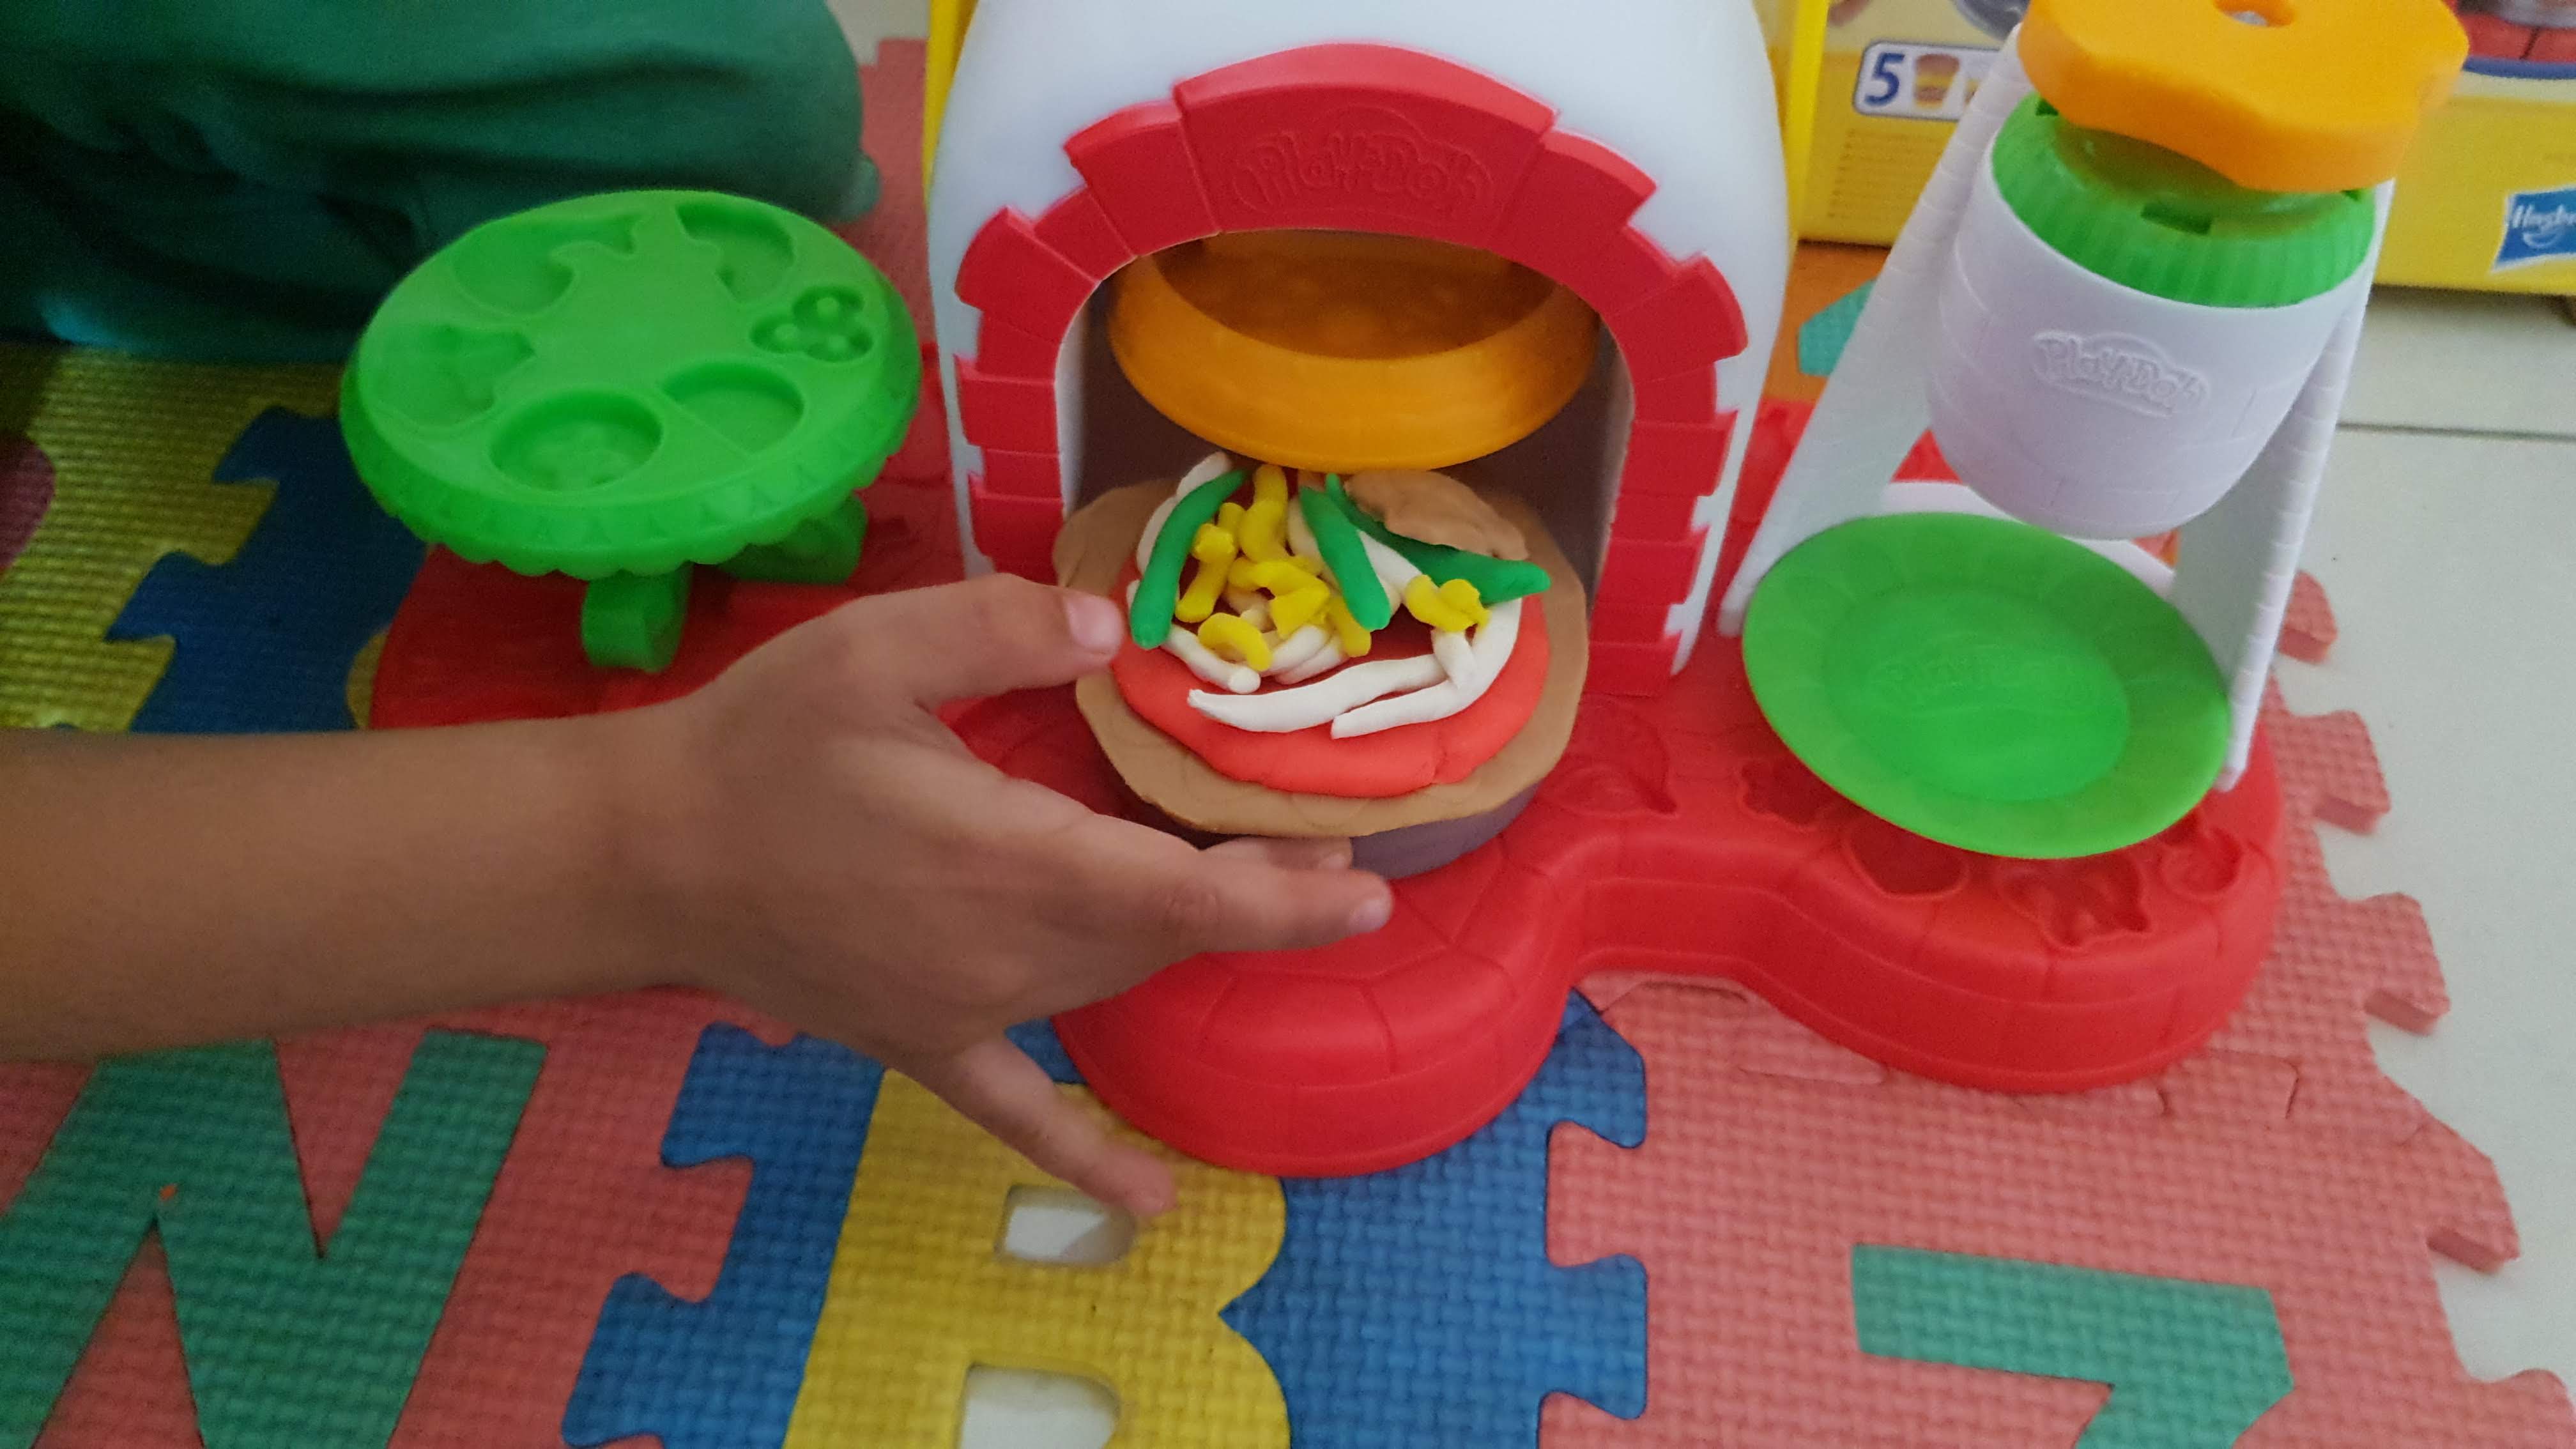  Play-Doh Kitchen Creations Stamp 'n Top Pizza Oven Toy